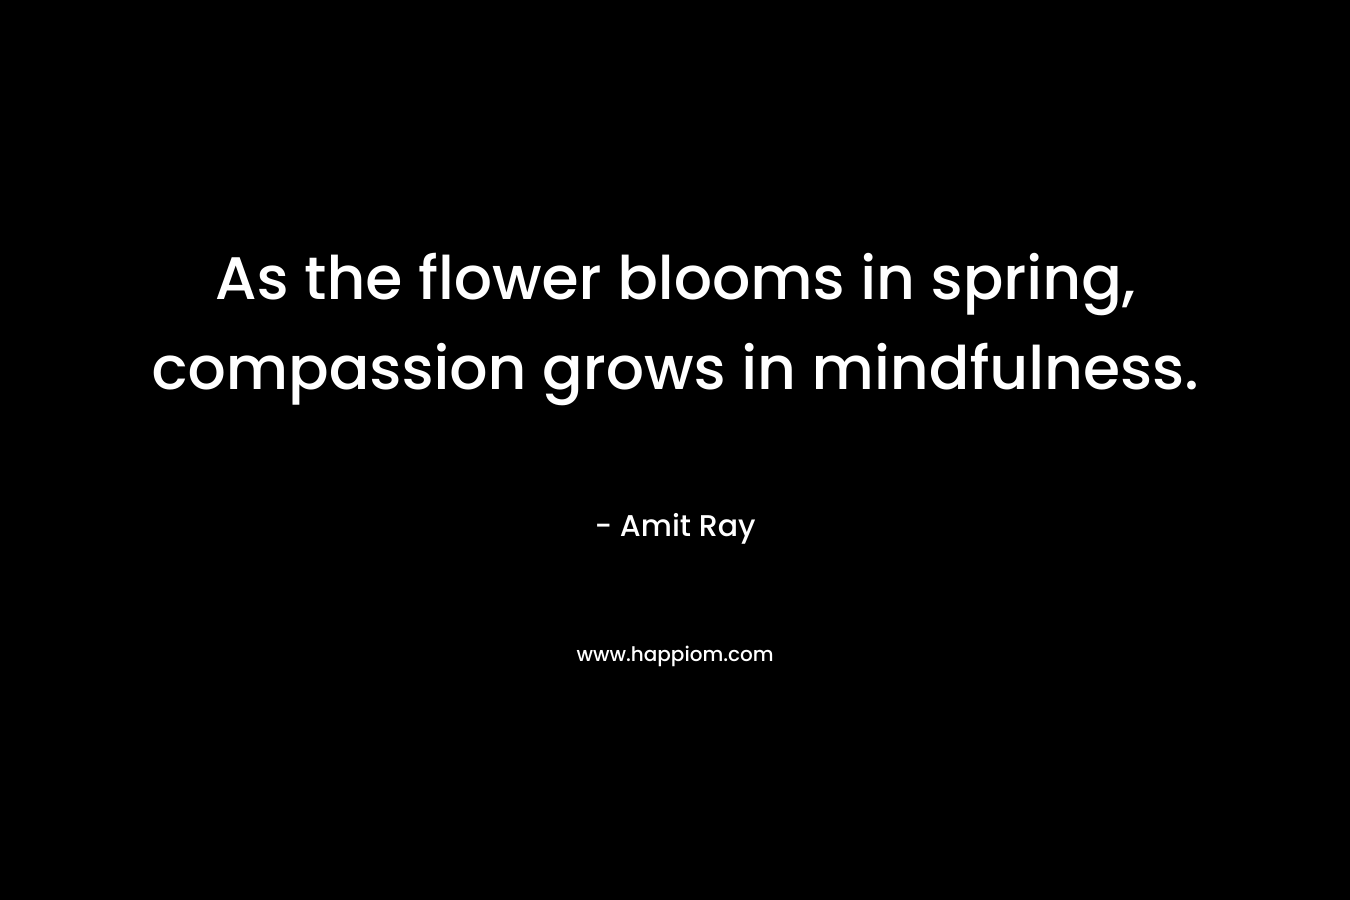 As the flower blooms in spring, compassion grows in mindfulness. – Amit Ray